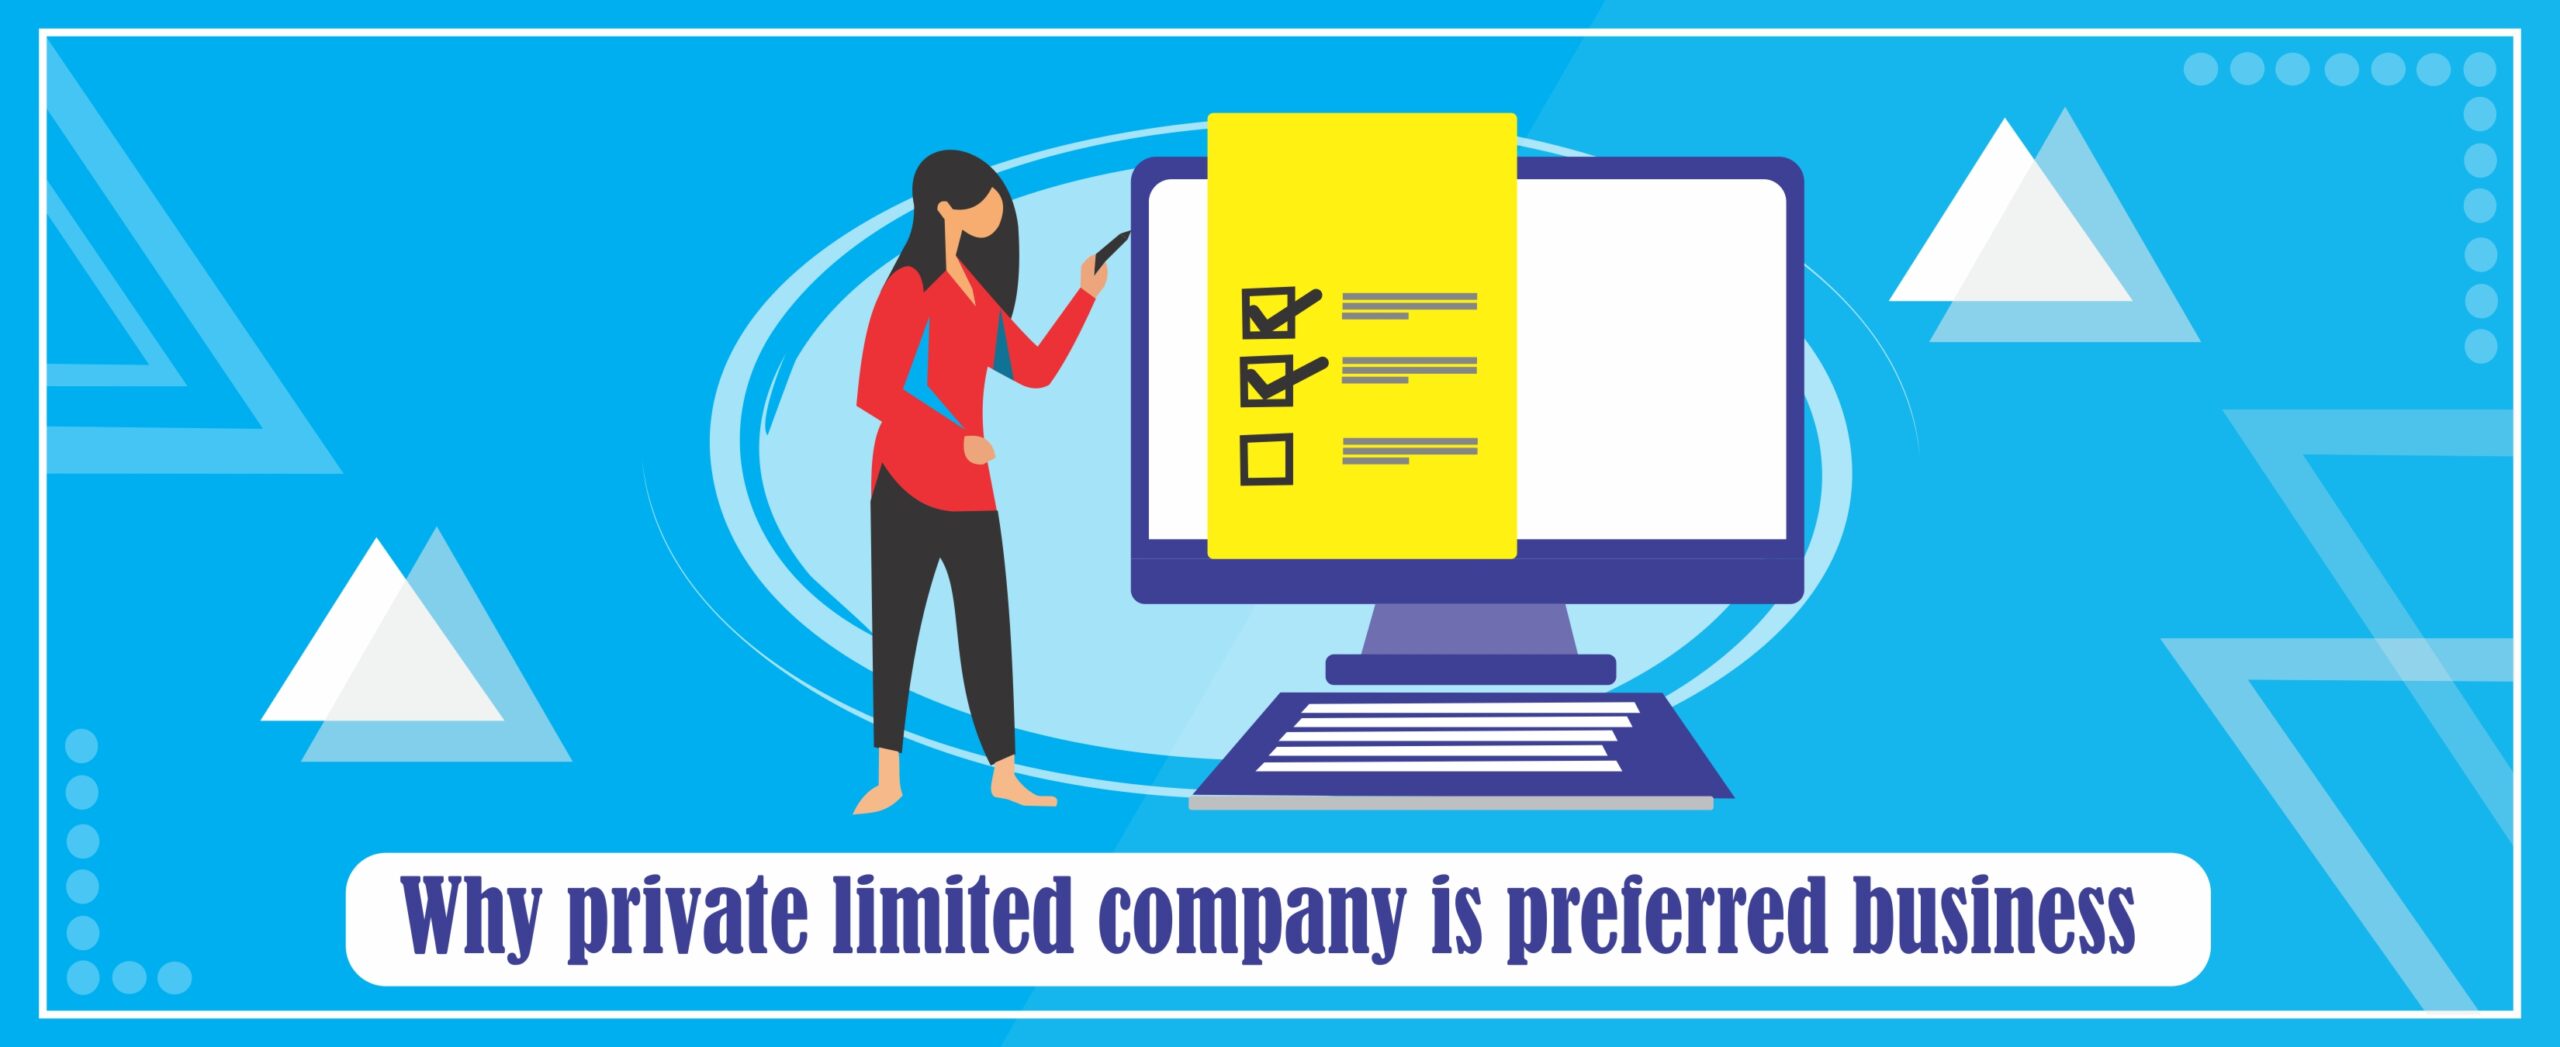 Why private limited company is preferred business